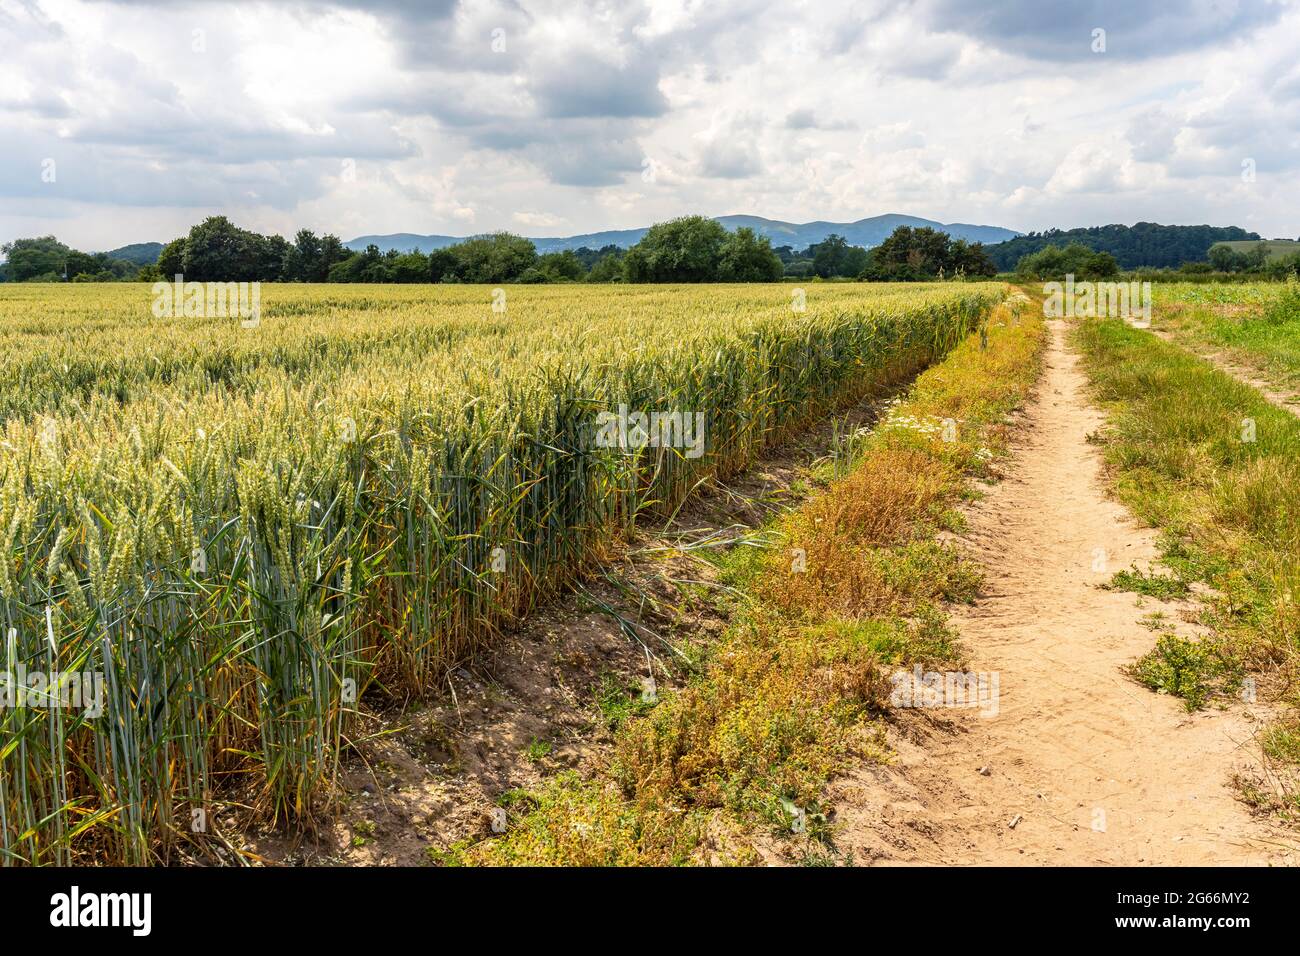 Wheat field in the English countryside in Worcestershire with a view of the Malvern Hills in the distance Stock Photo